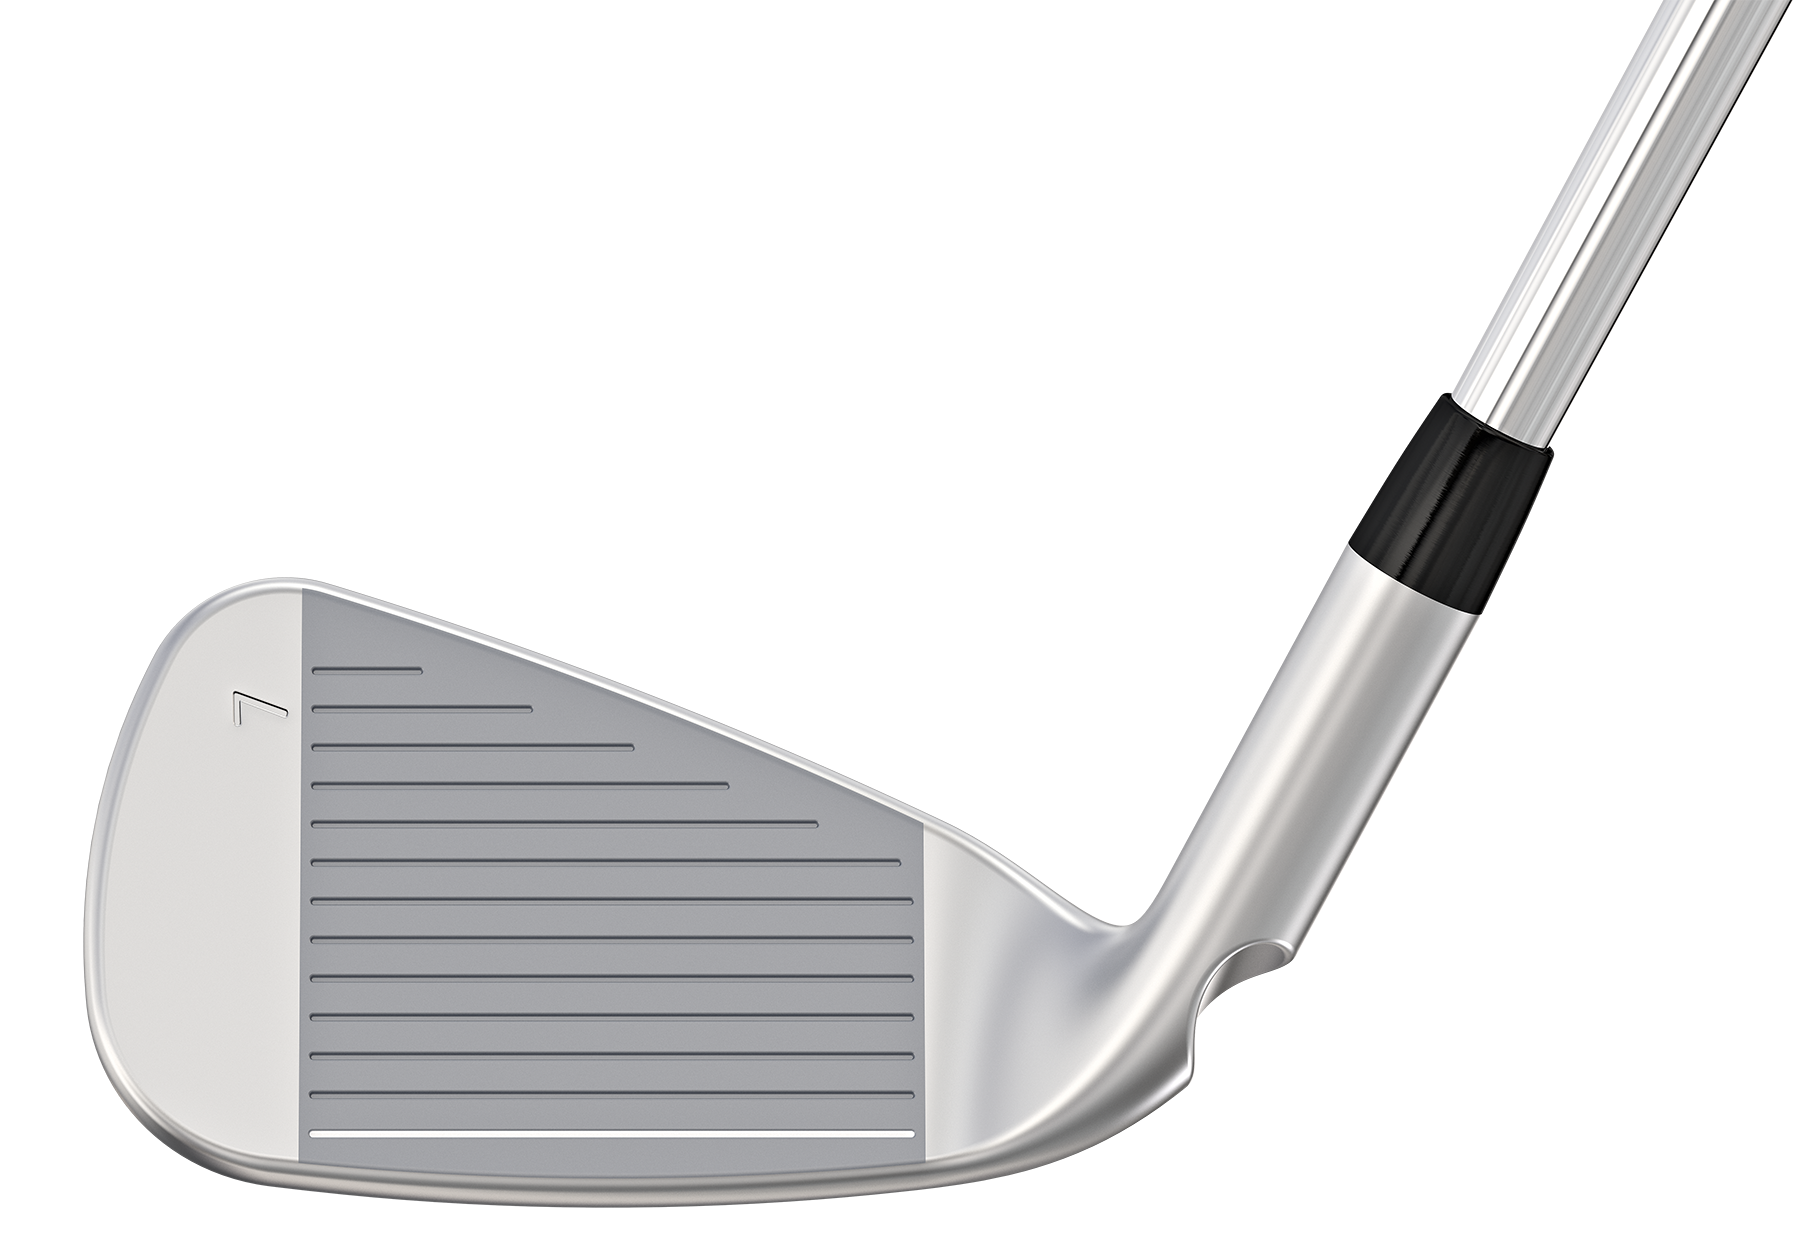 PING G400 iron review